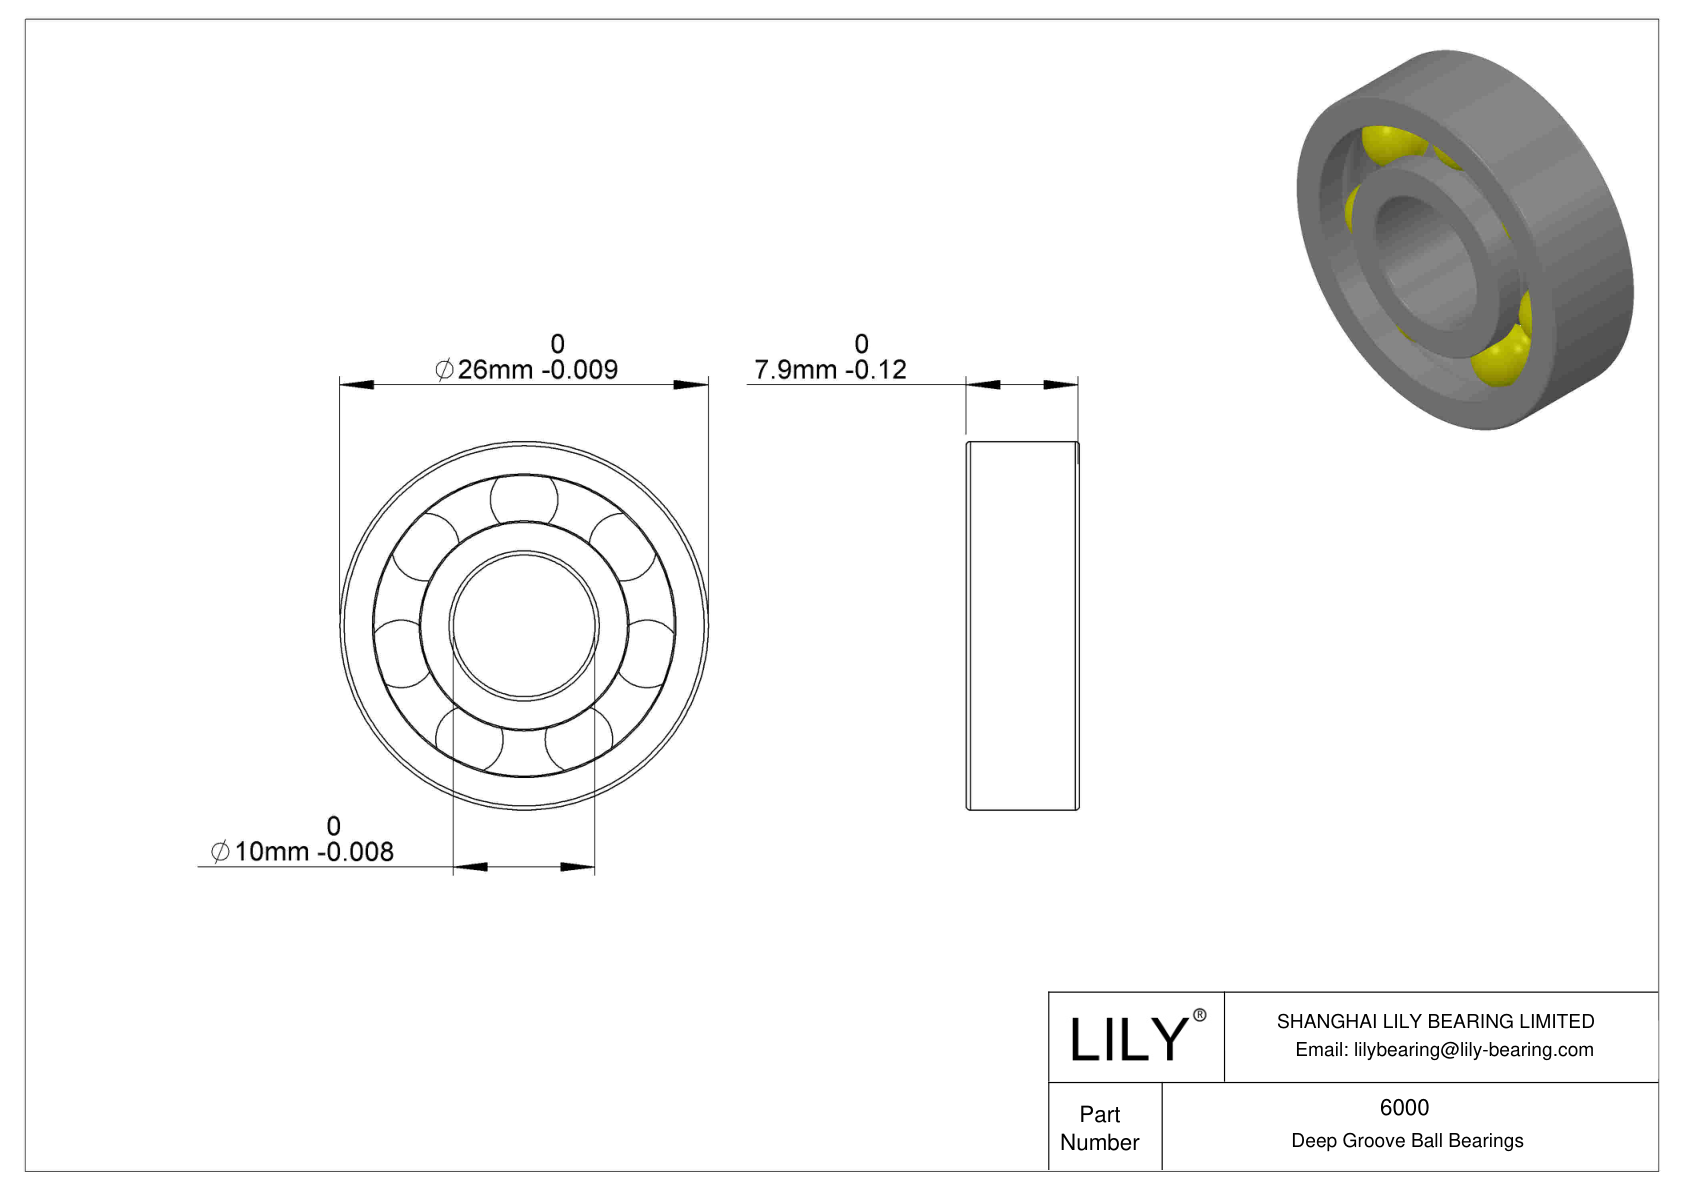 LILY-PU600032-10C1L10M8 Polyurethane Coated Bearing With Screw cad drawing